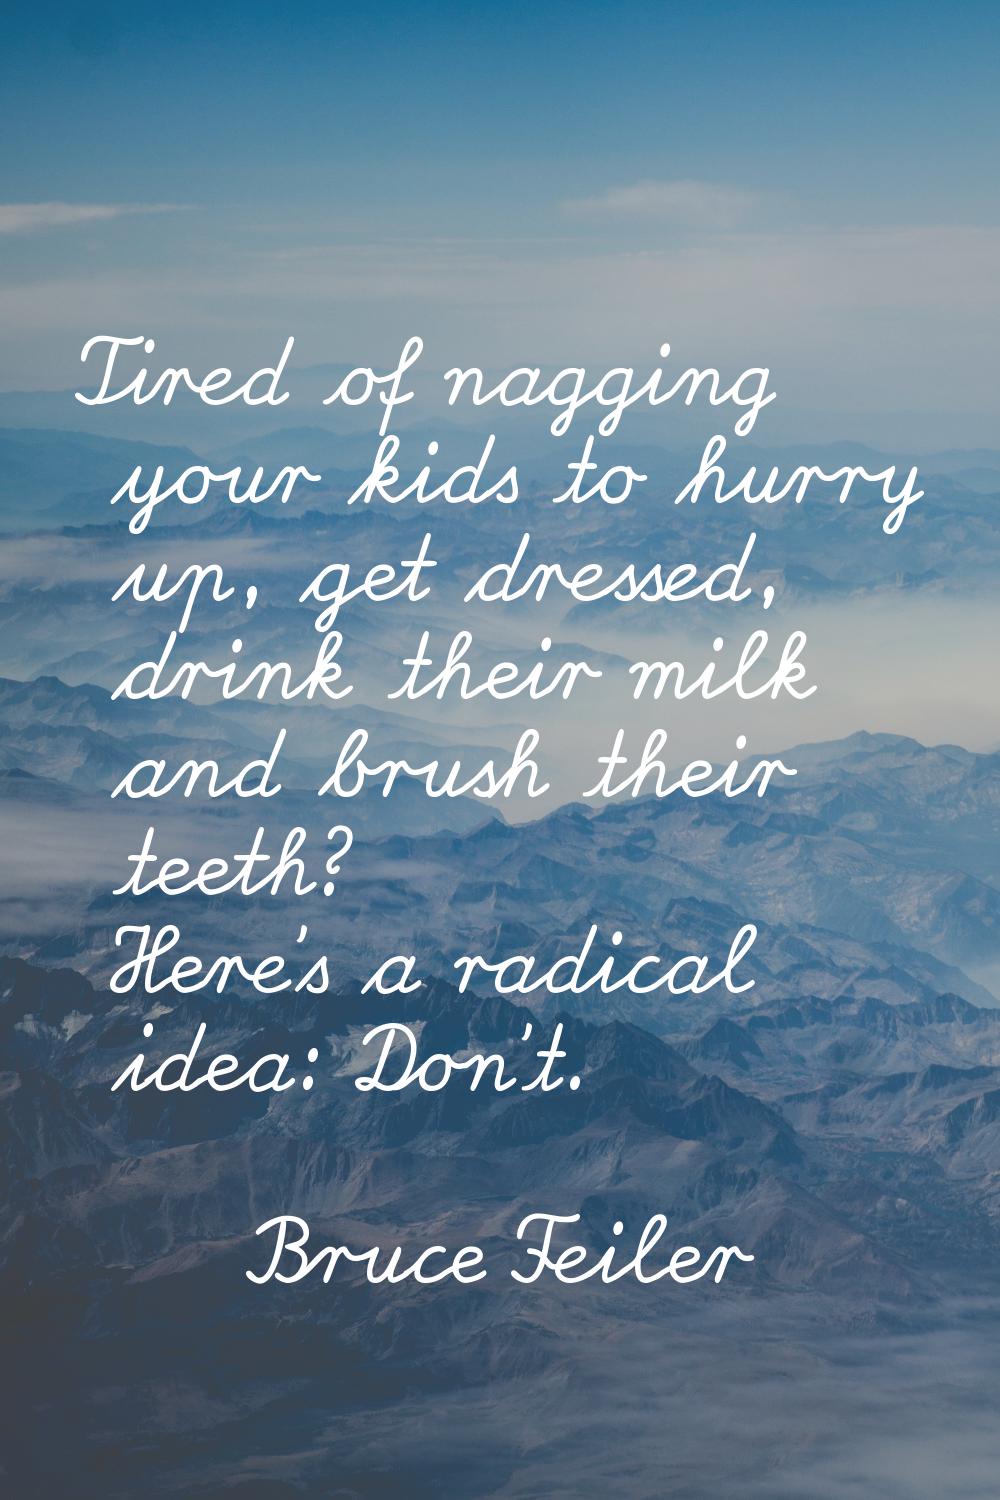 Tired of nagging your kids to hurry up, get dressed, drink their milk and brush their teeth? Here's